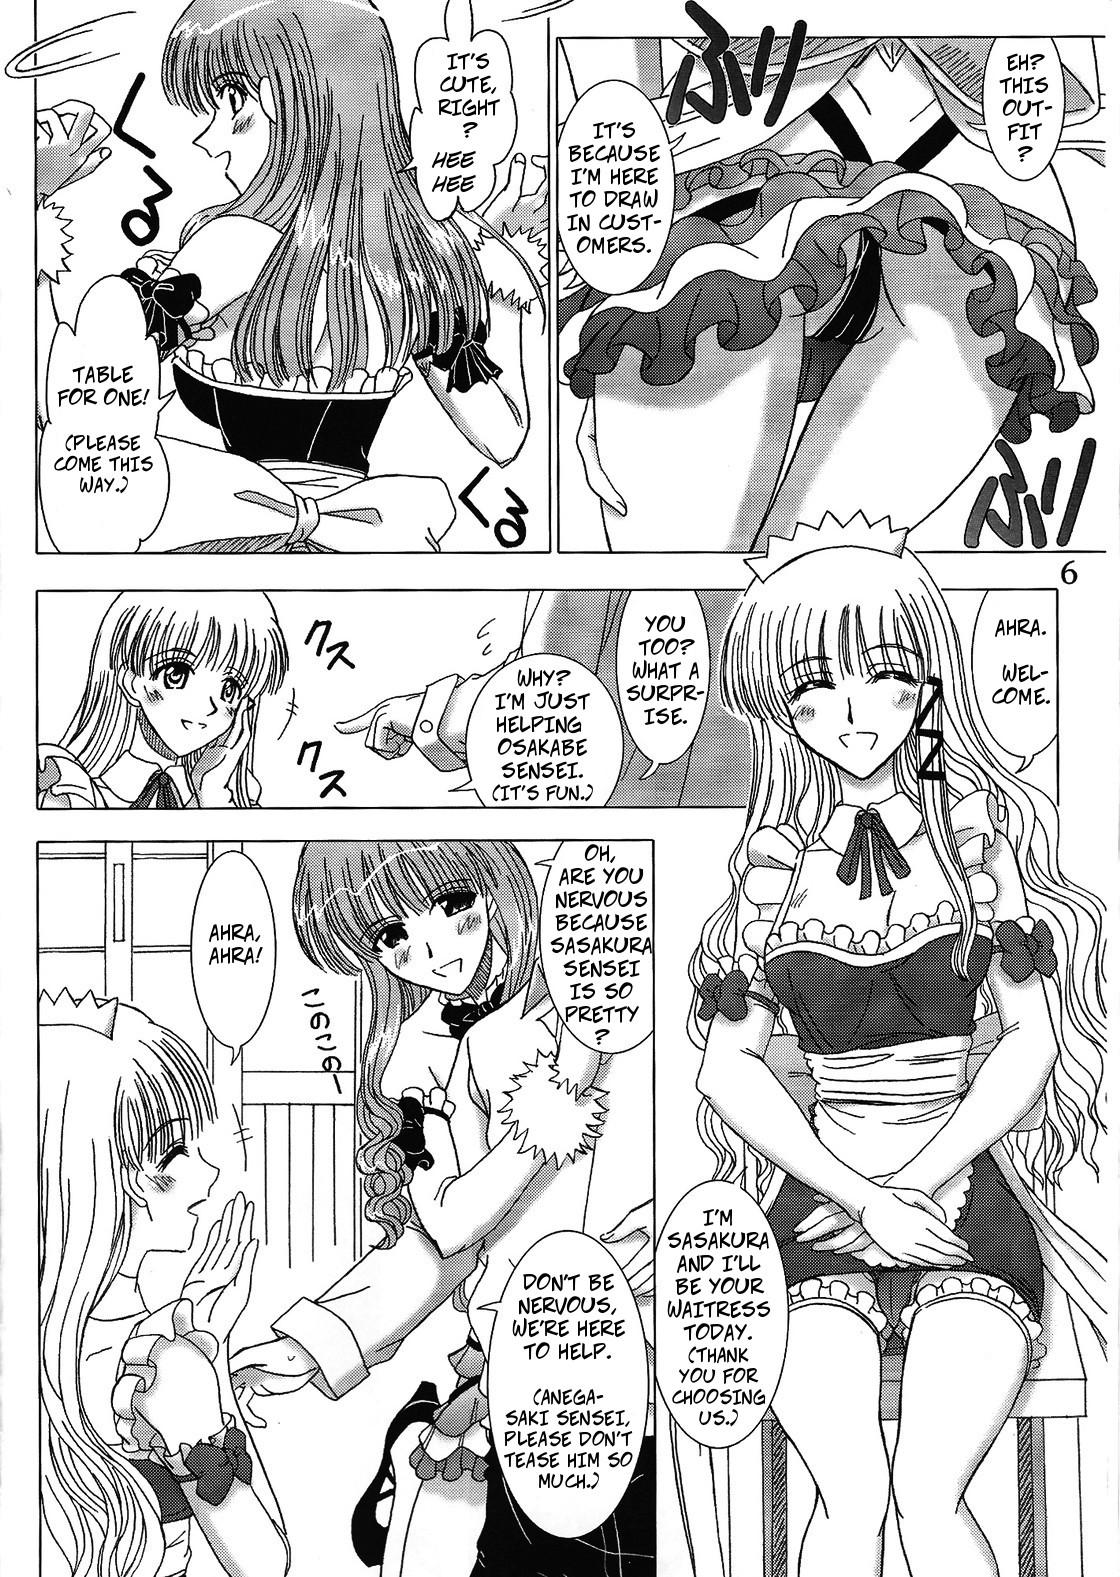 Bucetinha Cafe Tea Ceremony Club - School rumble Transsexual - Page 5